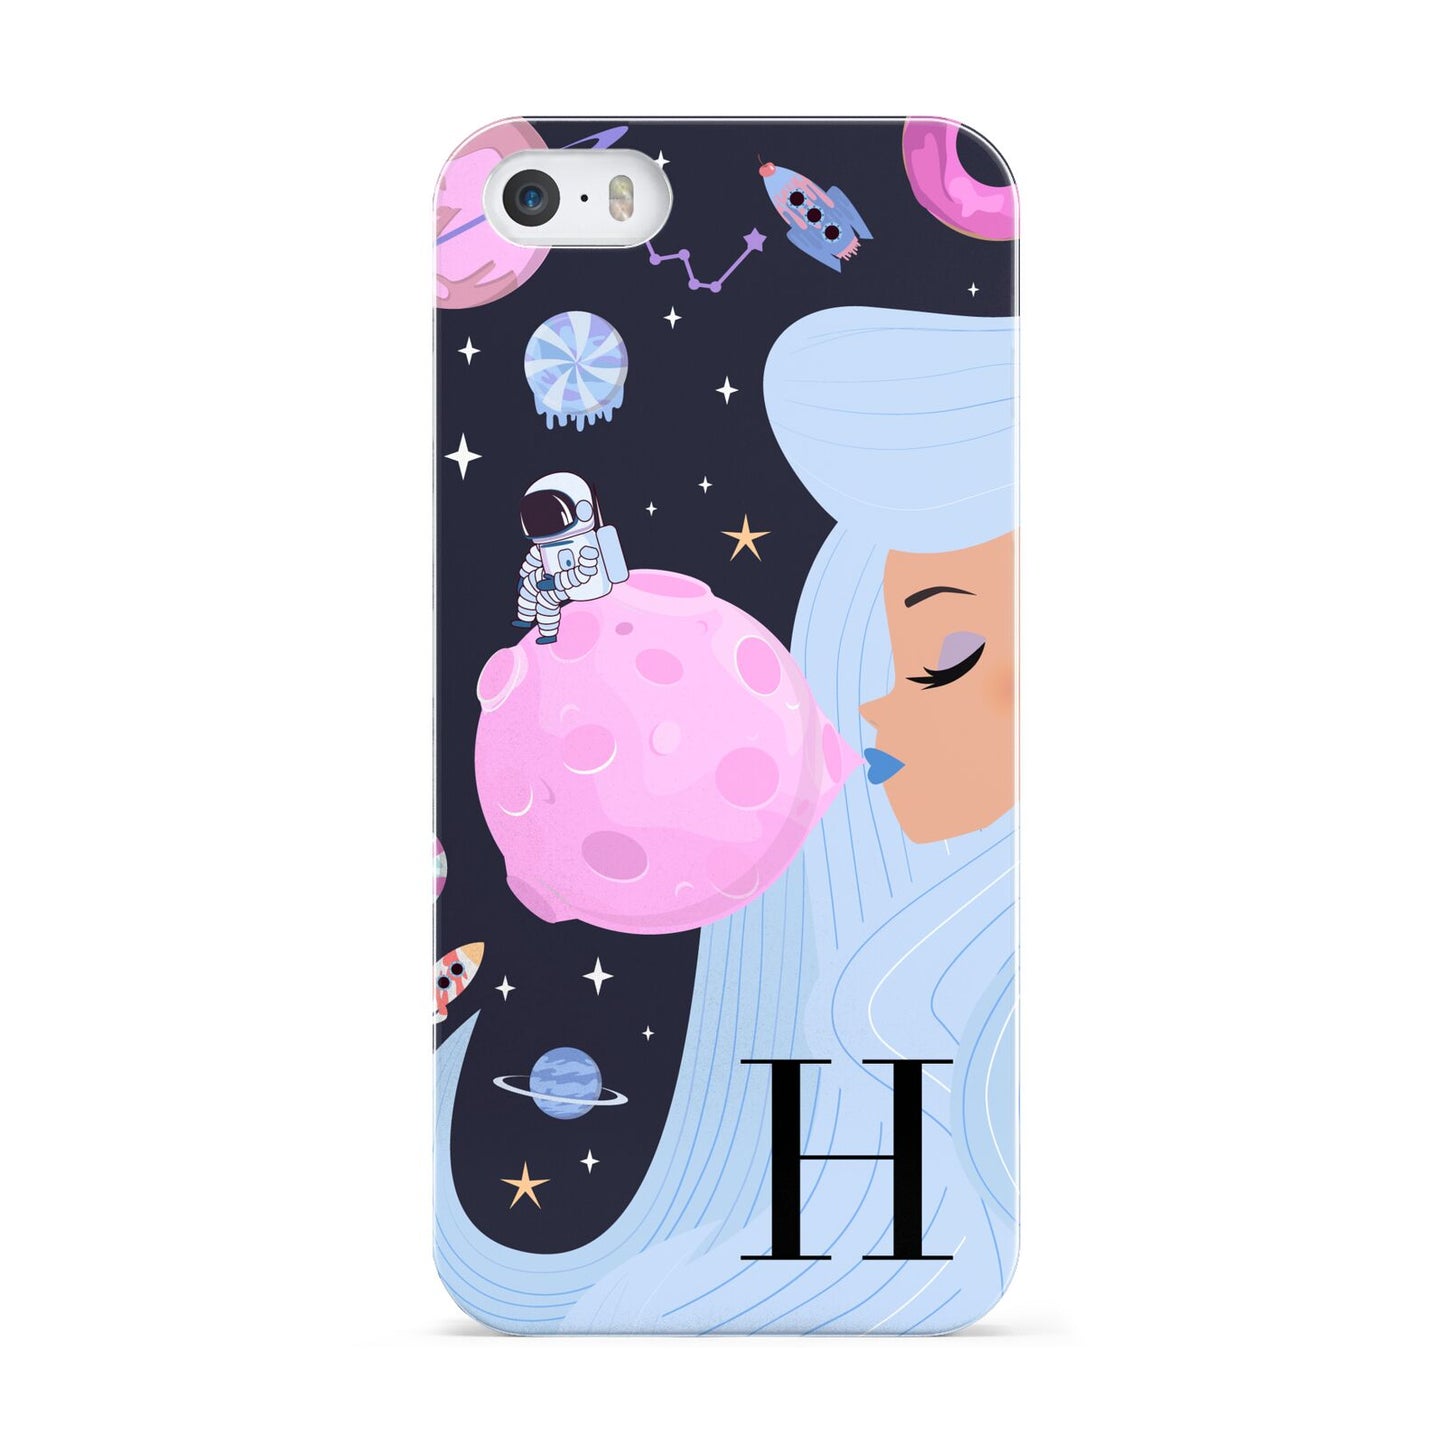 Ethereal Goddess in Space with Initial Apple iPhone 5 Case